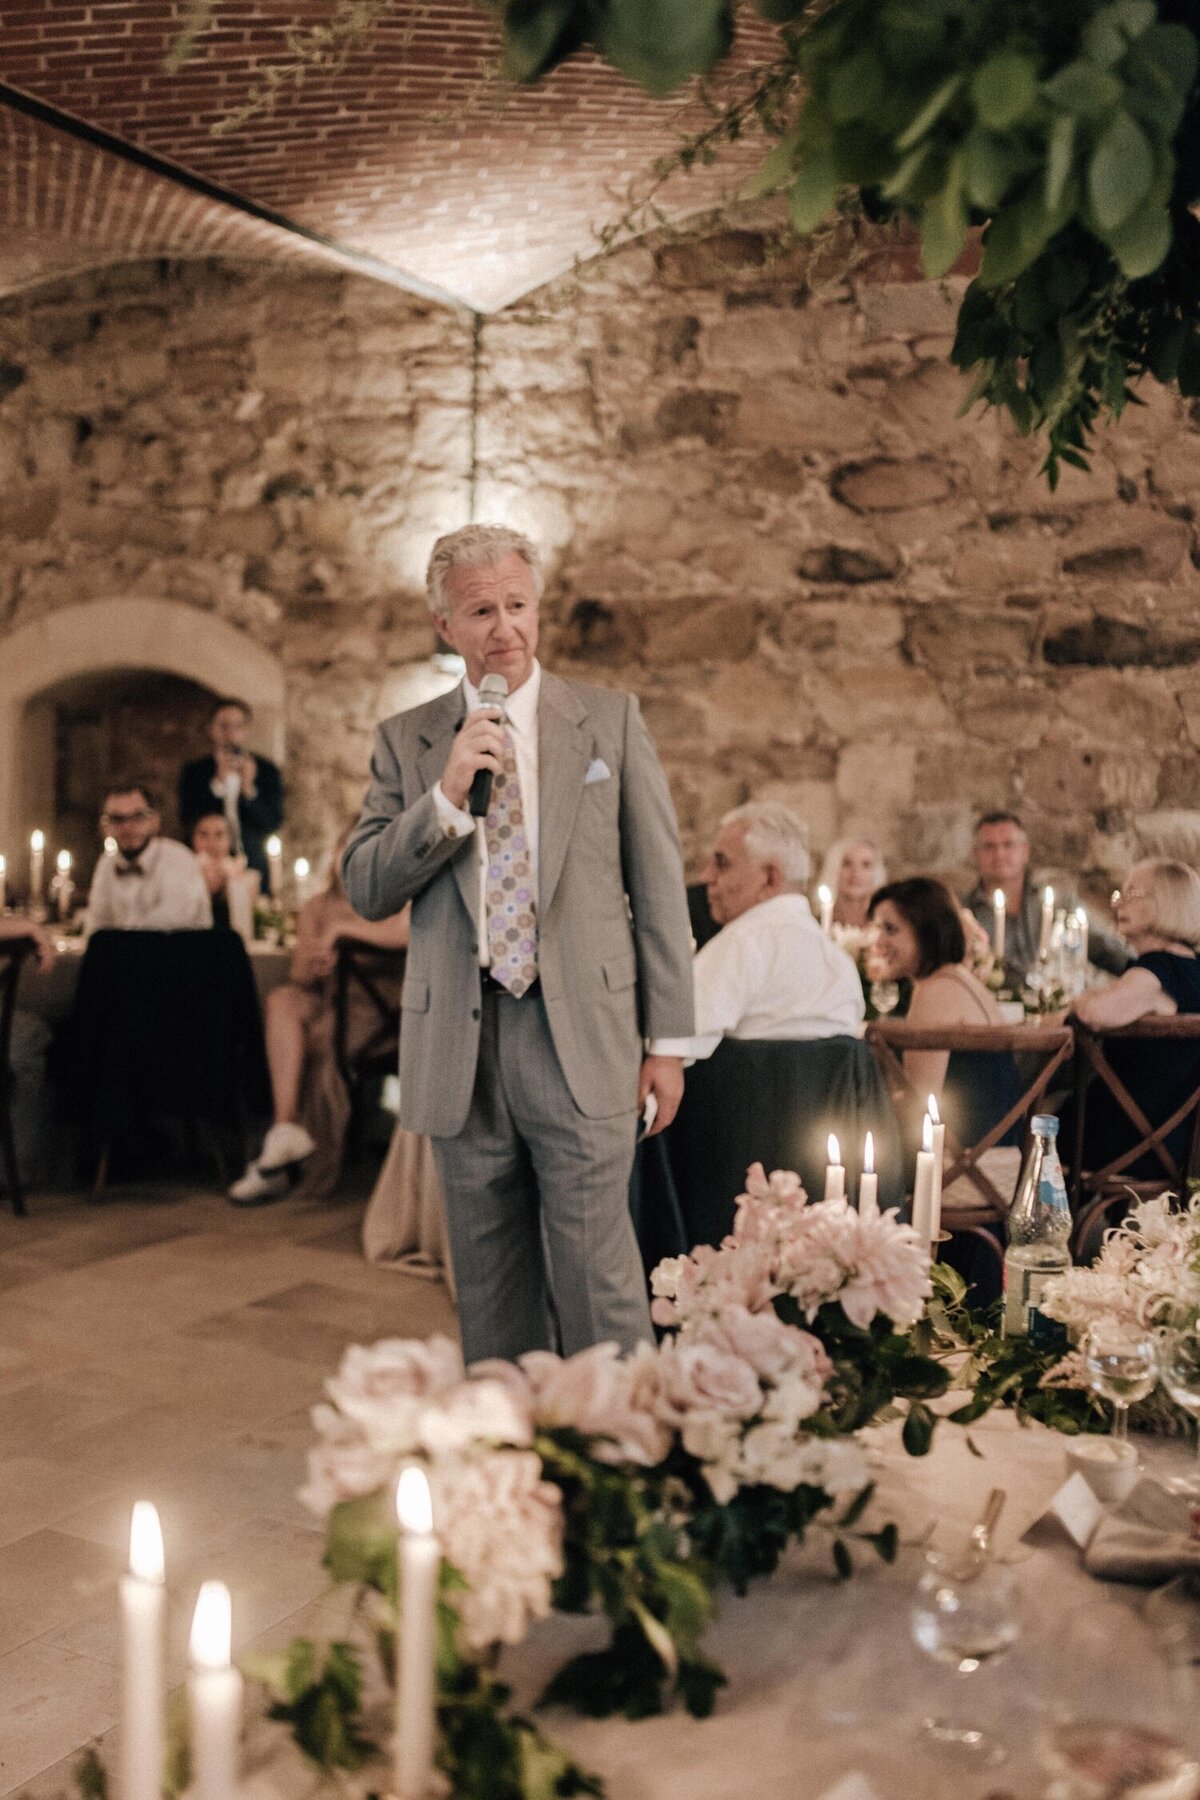 145_Flora_And_Grace_Europe_Destination_Wedding_Photographer-425_Elegant and whimsical destination wedding in Europe captured by editorial wedding photographer Flora and Grace.